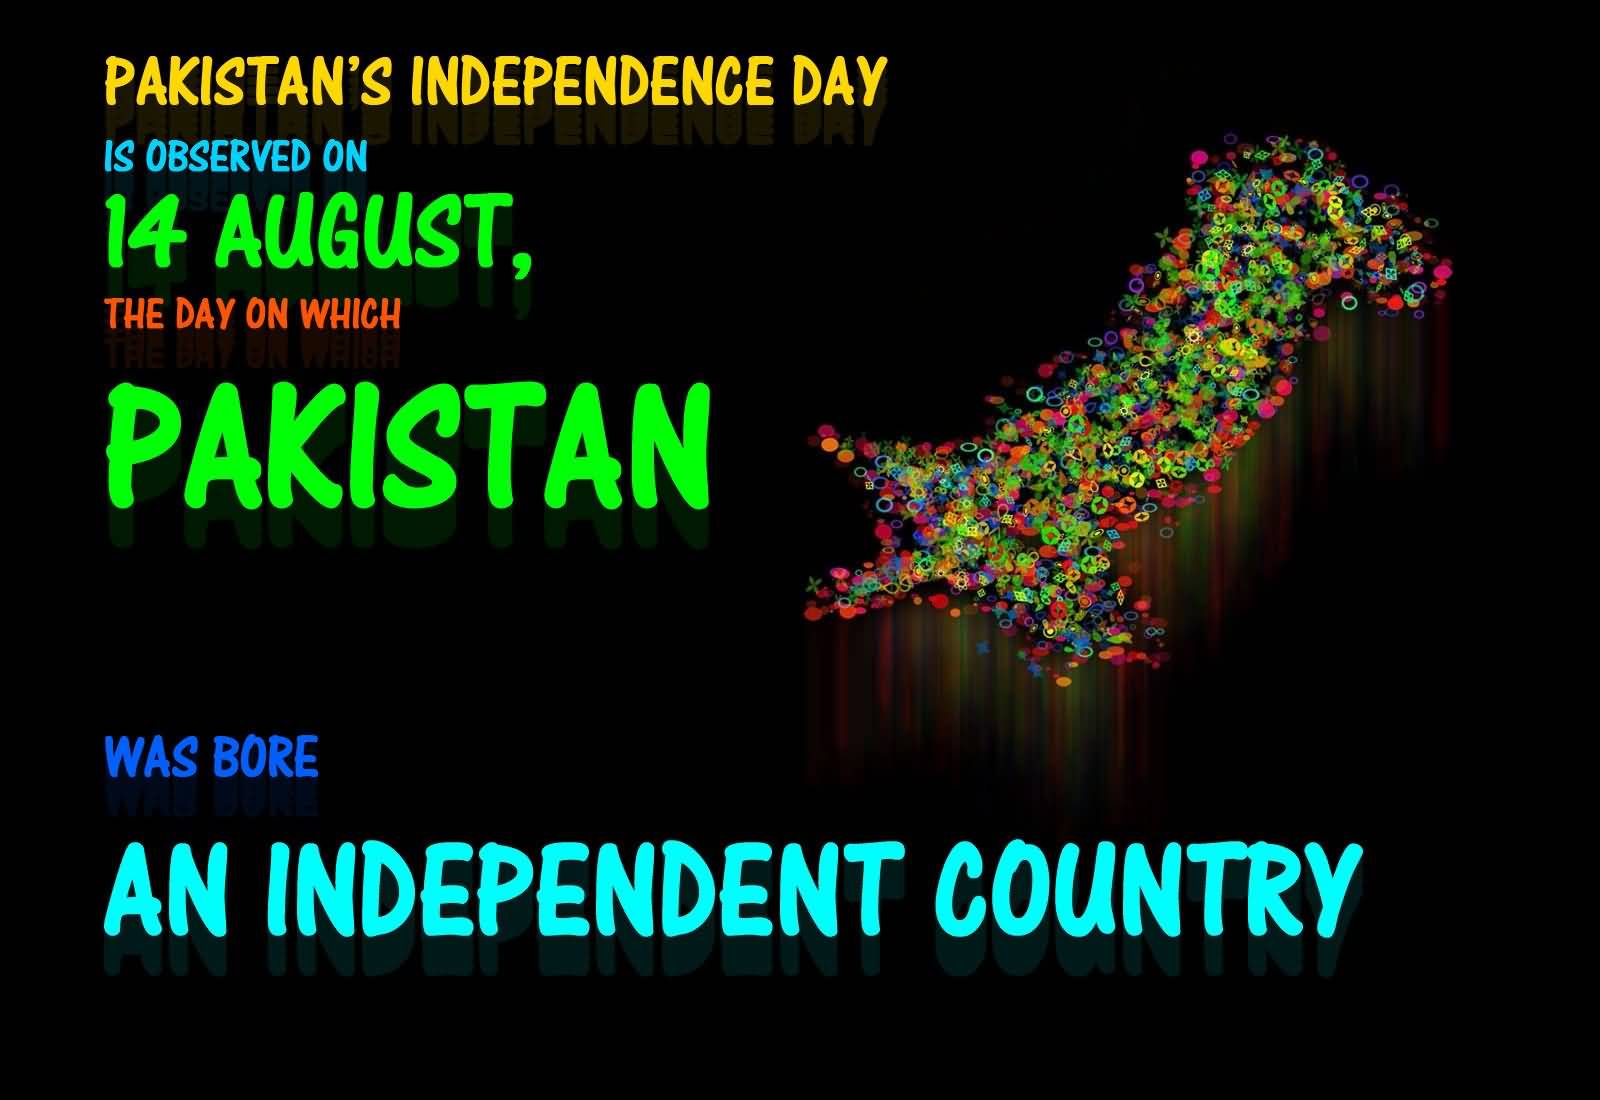 Pakistan's Independence Day Is Observed On 14 August The Day On Which Pakistan Was Bore Independent Country